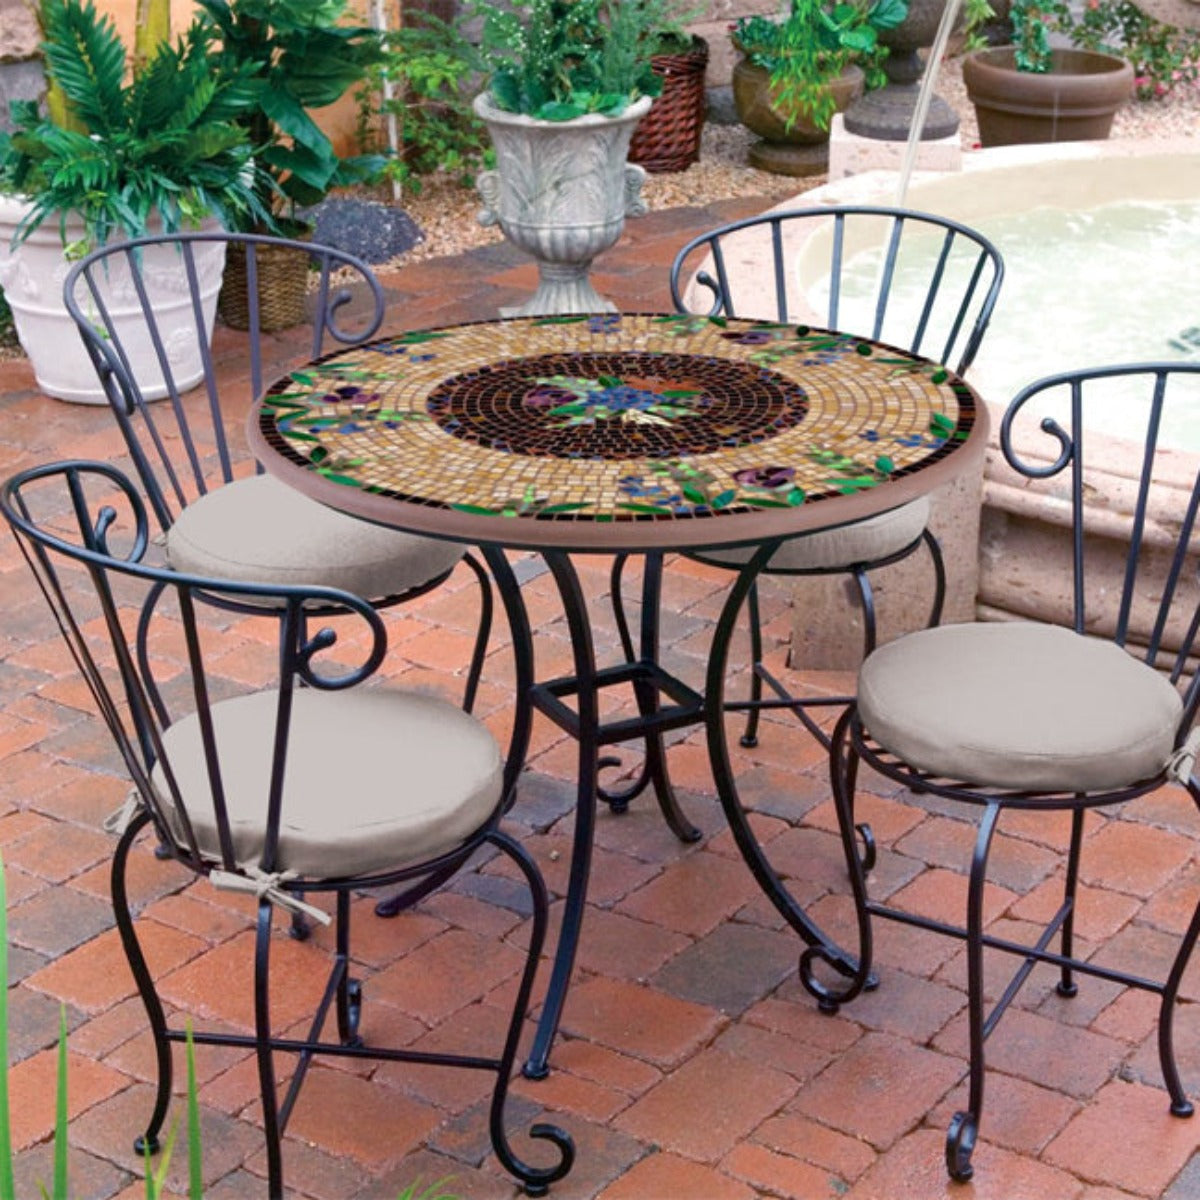 36" KNF Mosaic Patio Tables